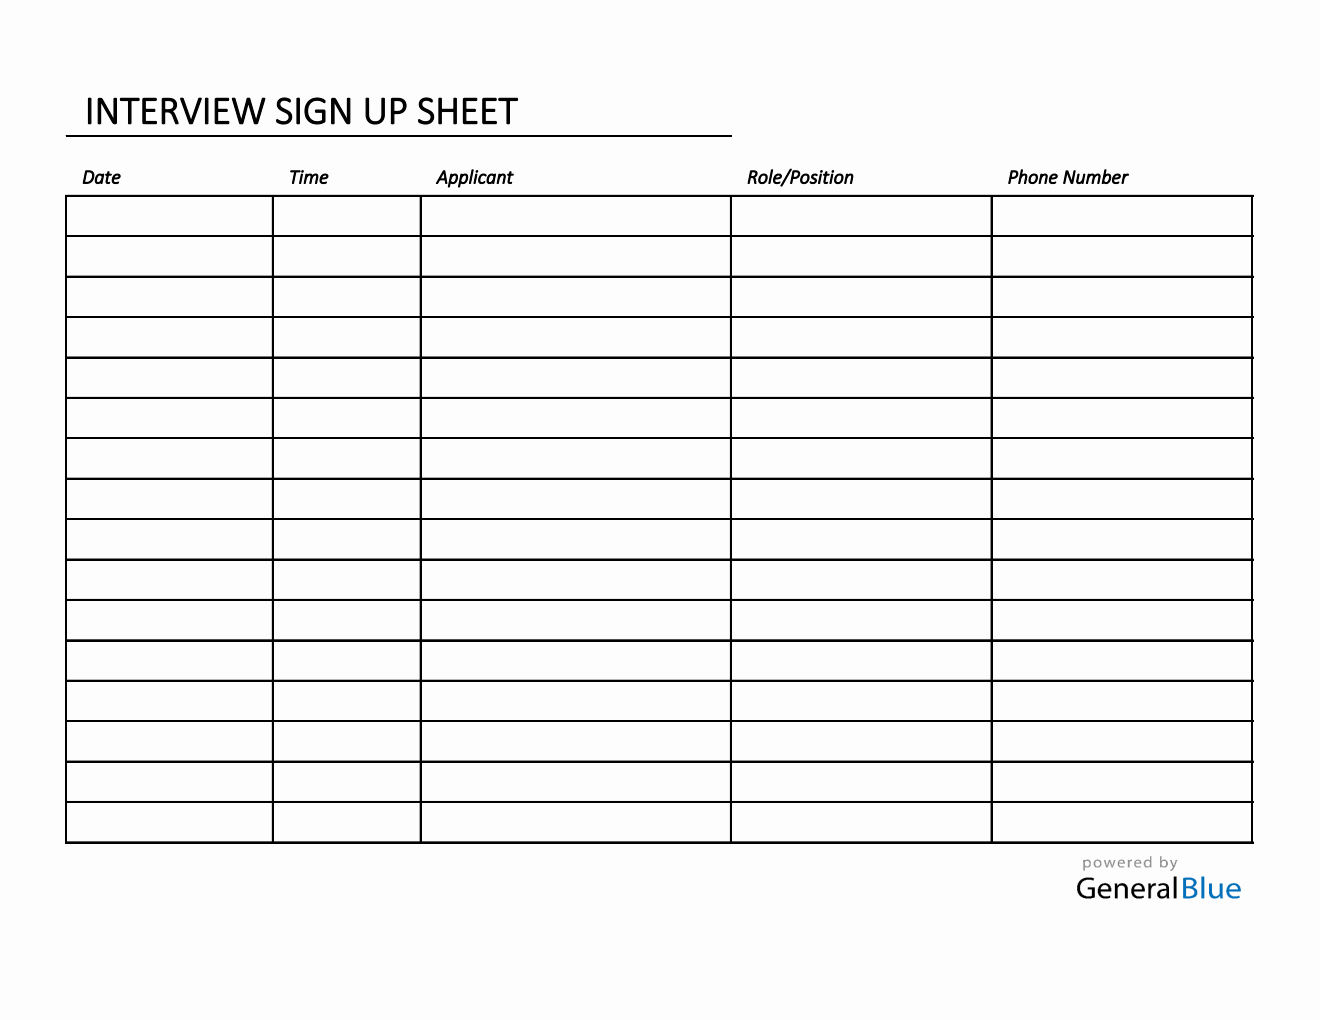 Interview Sign Up Sheet Template in Excel (Simple)